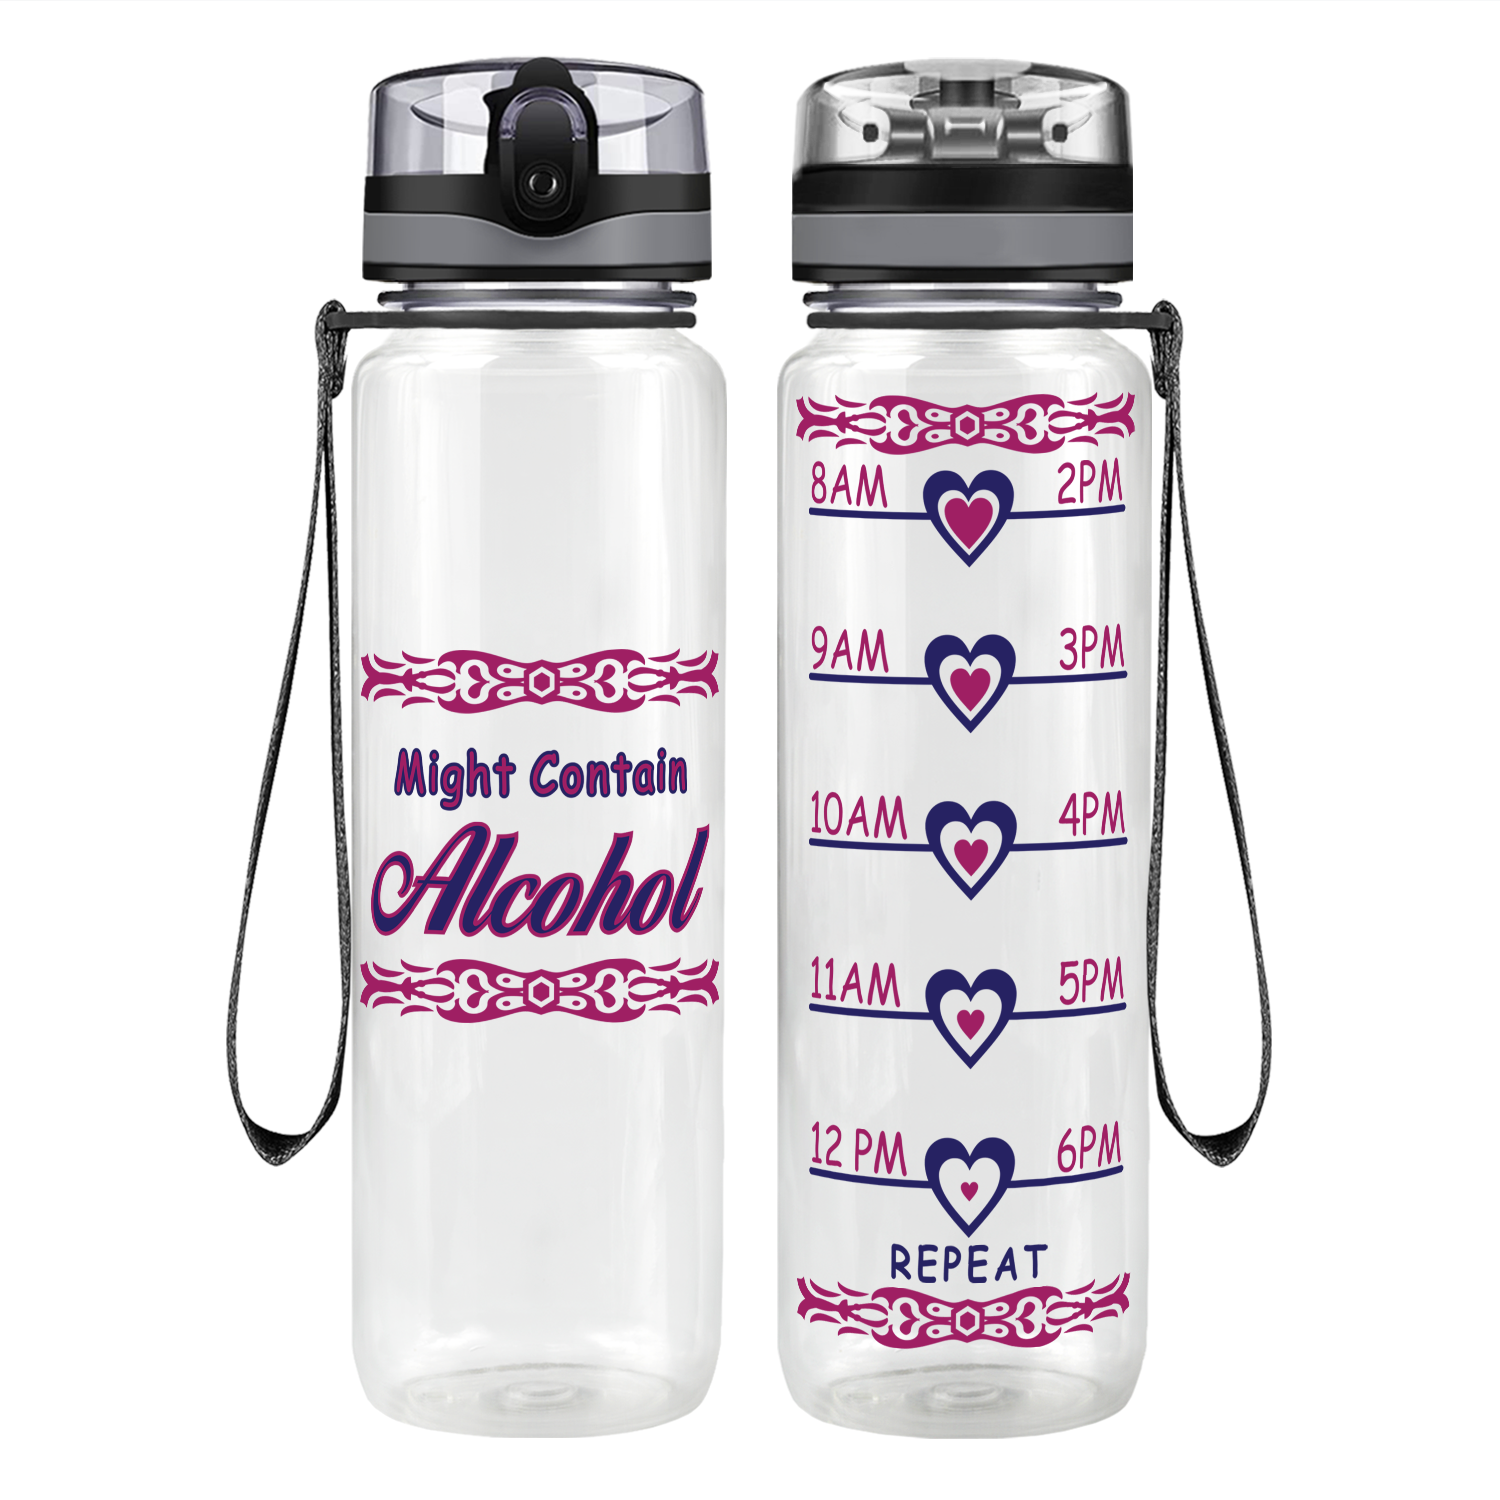 Might Contain Alcohol Motivational Tracking Water Bottle